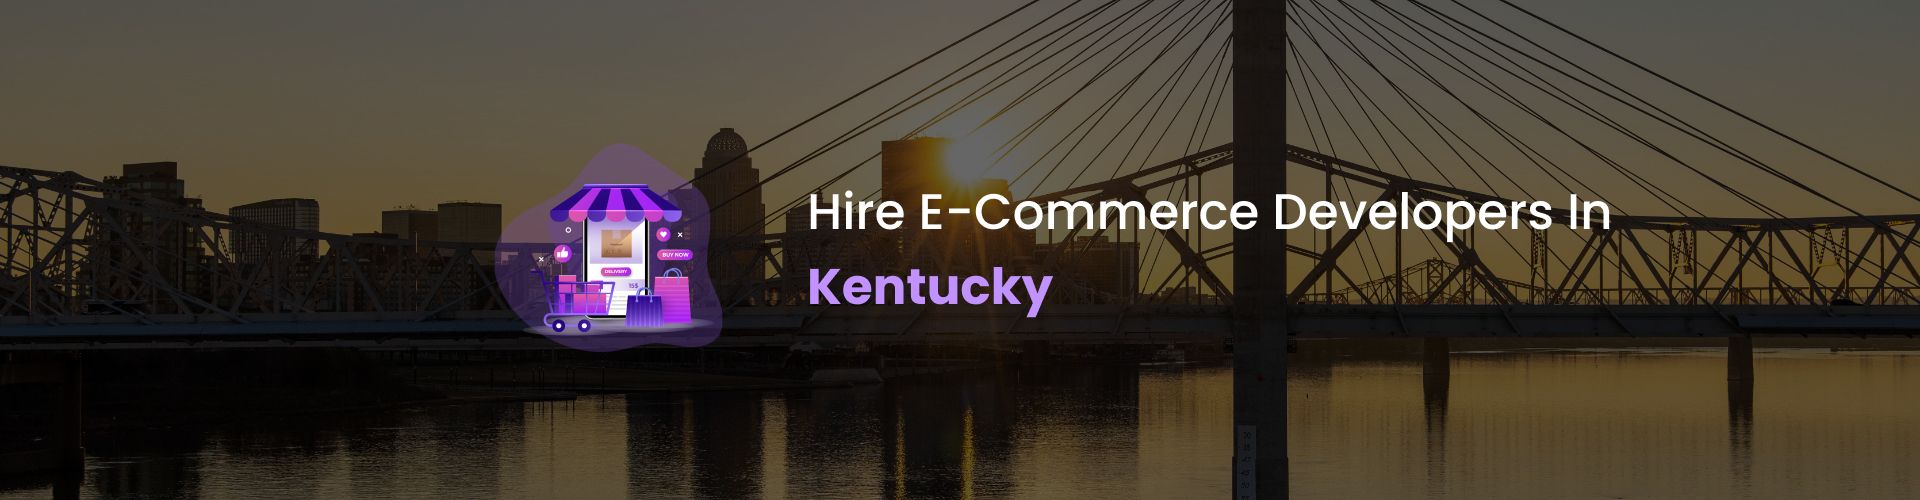 hire ecommerce developers in kentucky